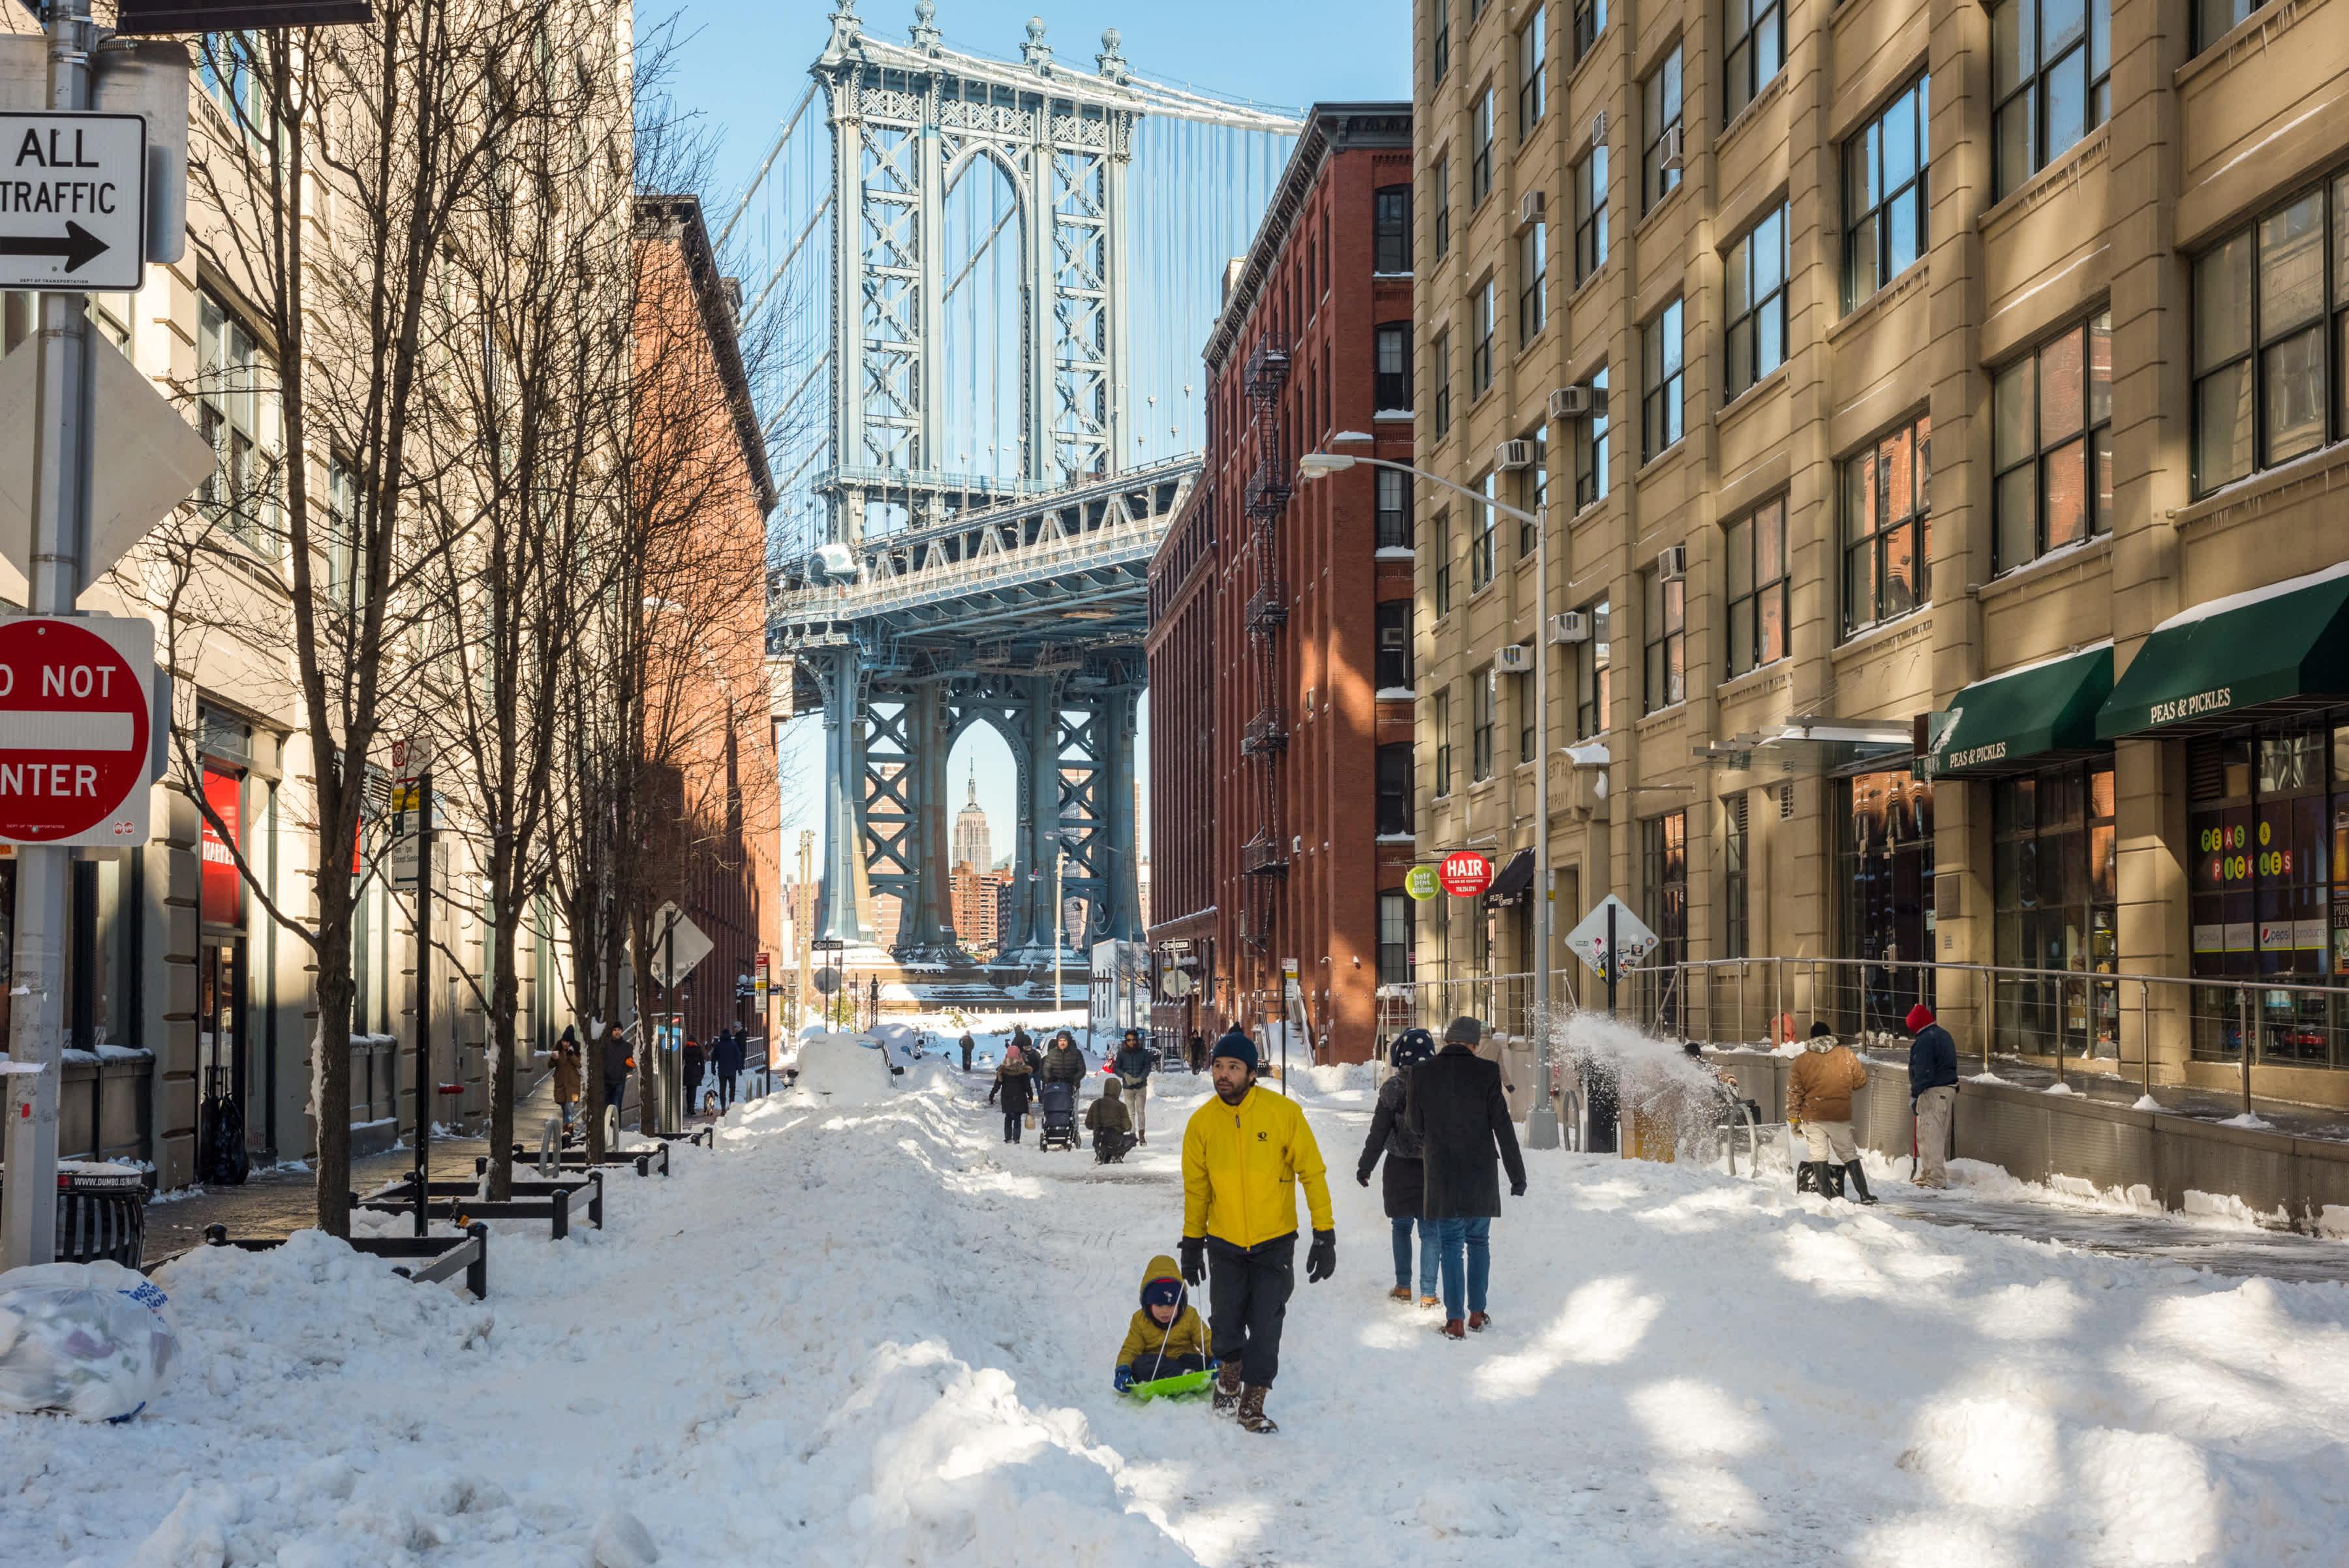 people enjoying the winter in DUMBO, during a snowstorm, manhattan bridge in the background